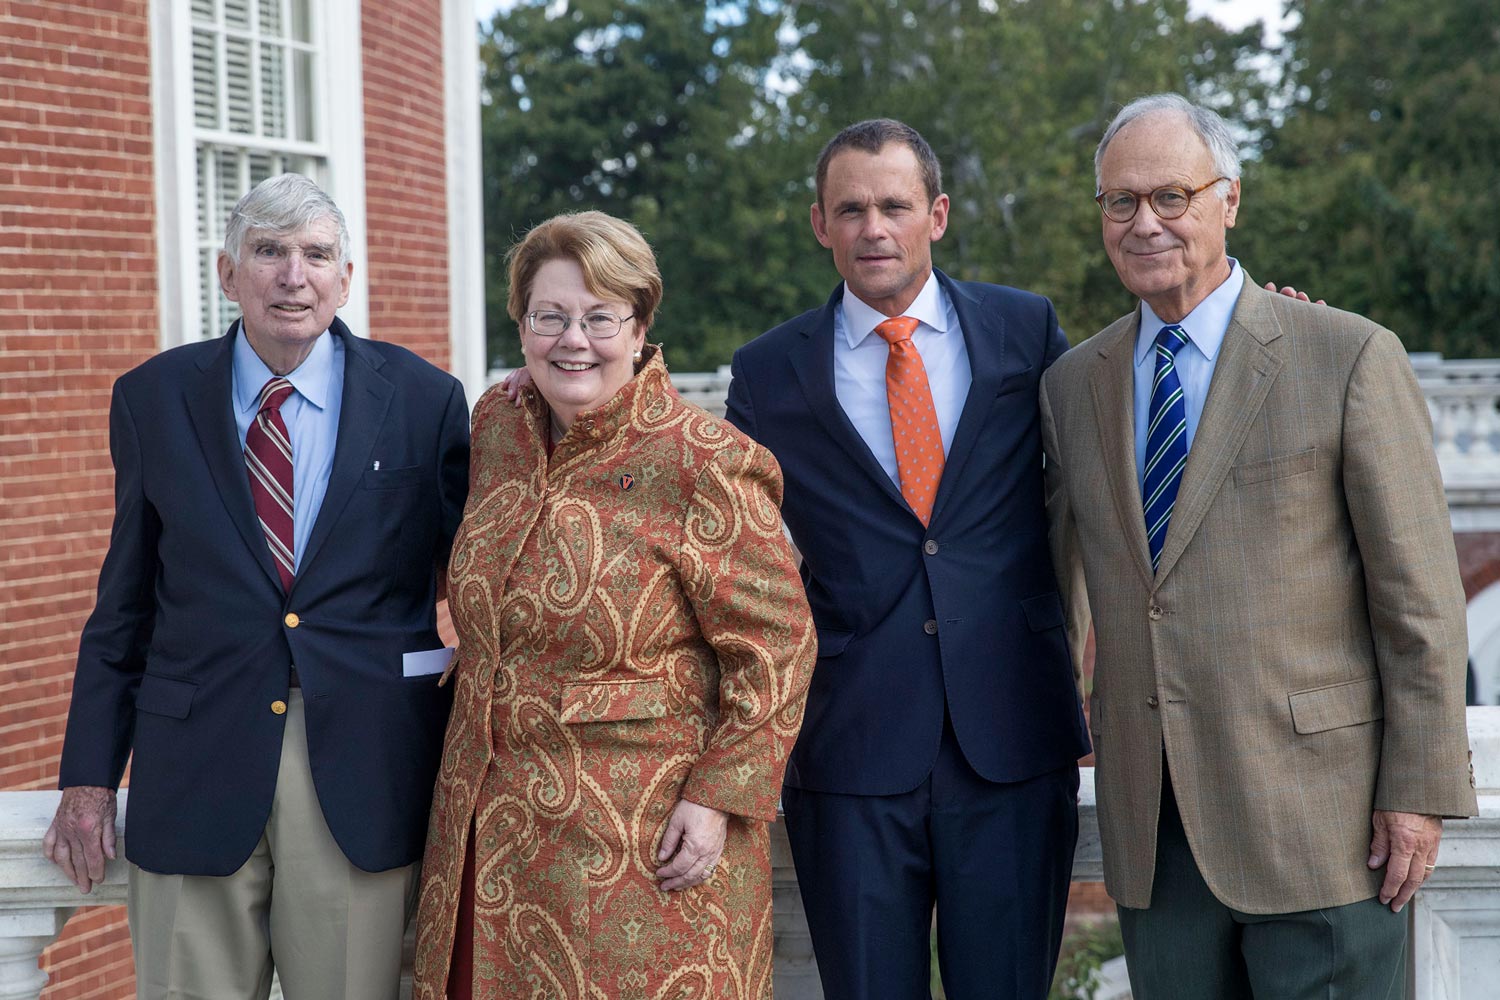 The three living presidents of the University gather for a photo with the president-elect: from left, Robert M. O’Neil, Teresa A. Sullivan, Ryan and John T. Casteen III. (Photo by Sanjay Suchak, University Communications)